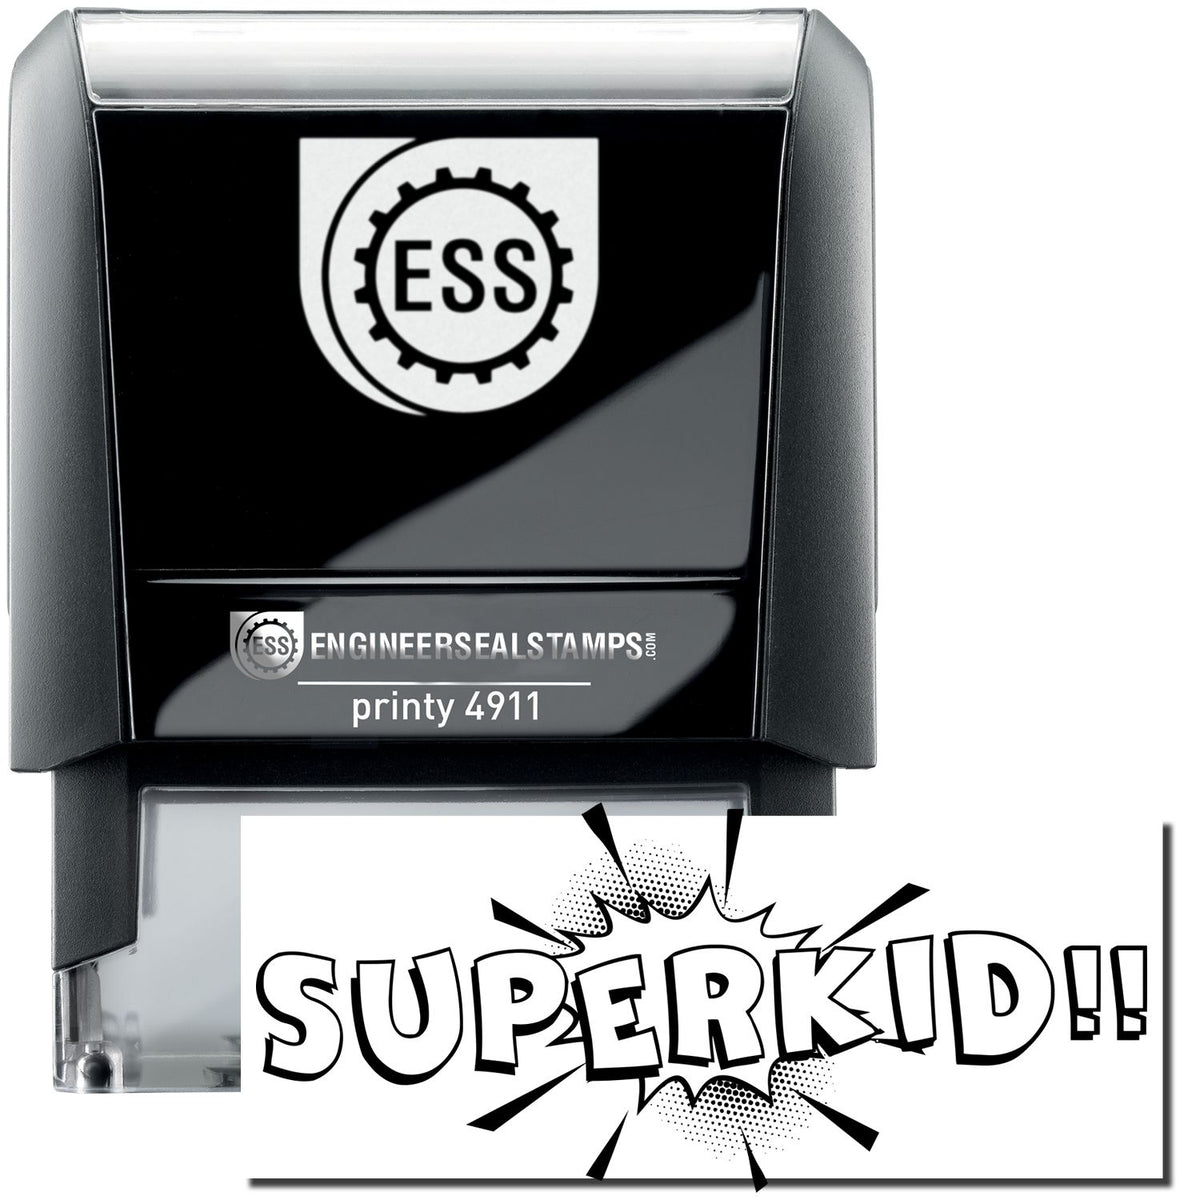 A self-inking stamp with a stamped image showing how the text &quot;SUPERKID!!&quot; (in a bold, urban font with a background that seems like it came out of comic book pages) is displayed after stamping.